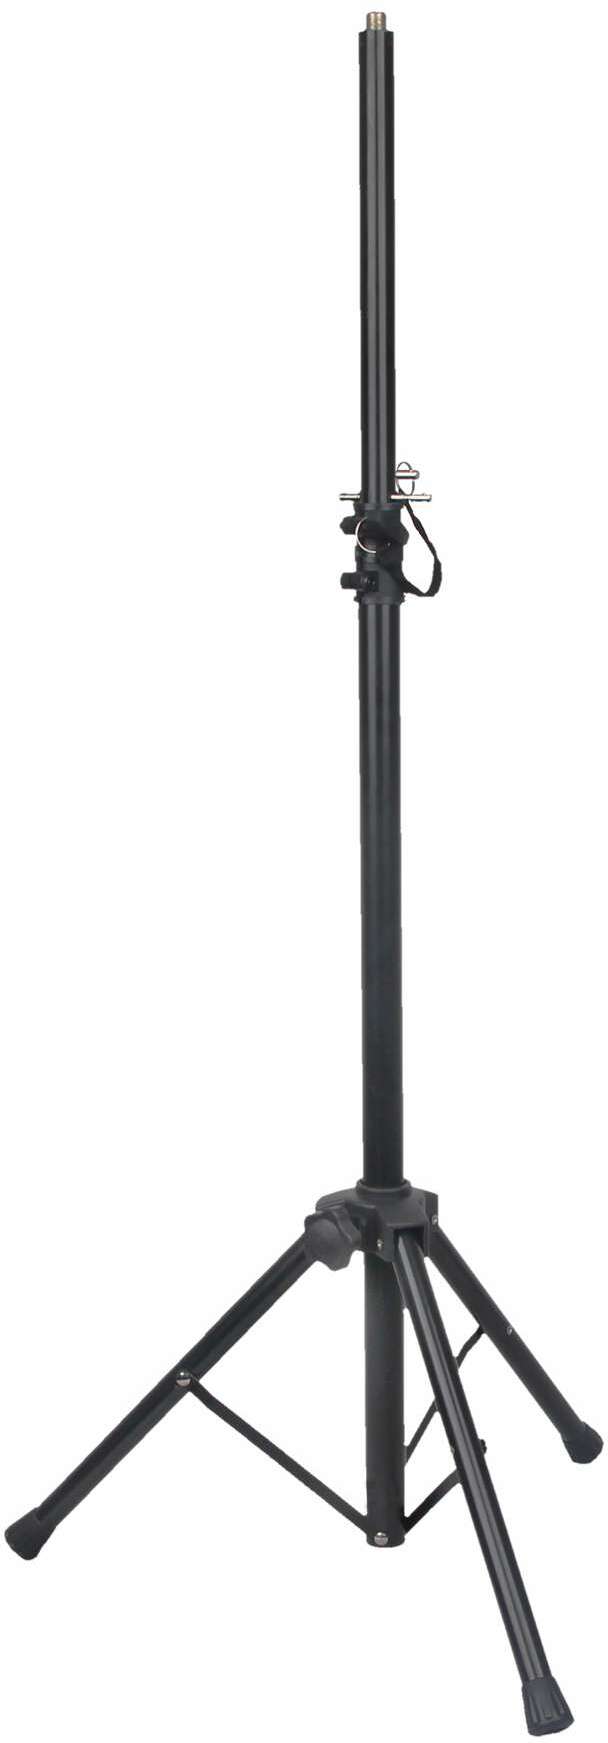 Power Pf 32 Pied Pour Filtre Antibruit - Microphone stand - Main picture